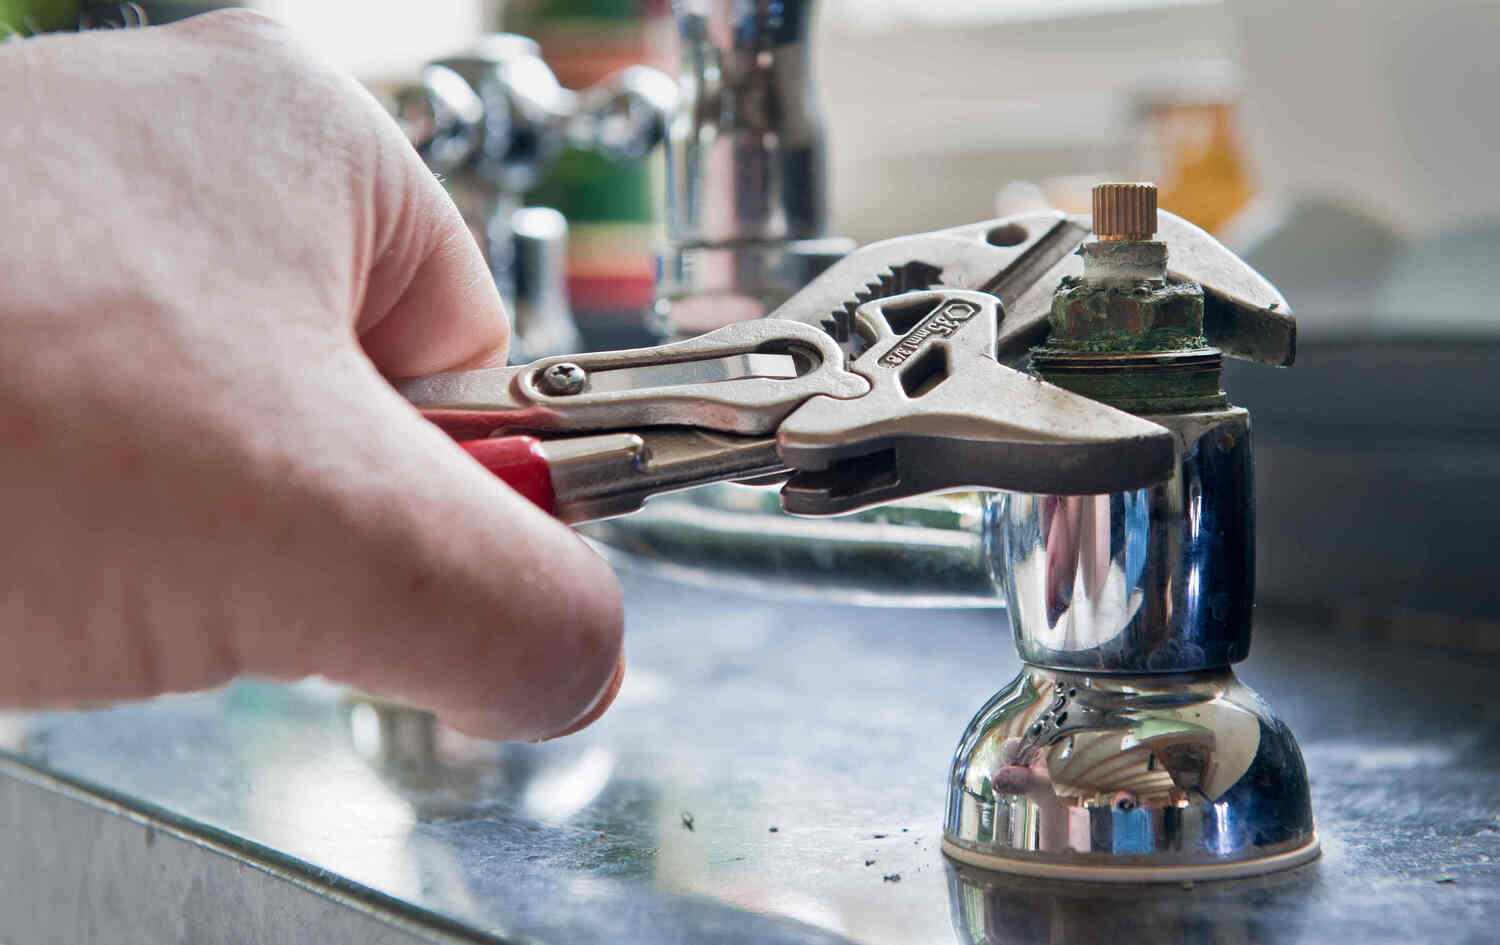 How To Loosen A Tight Faucet Handle